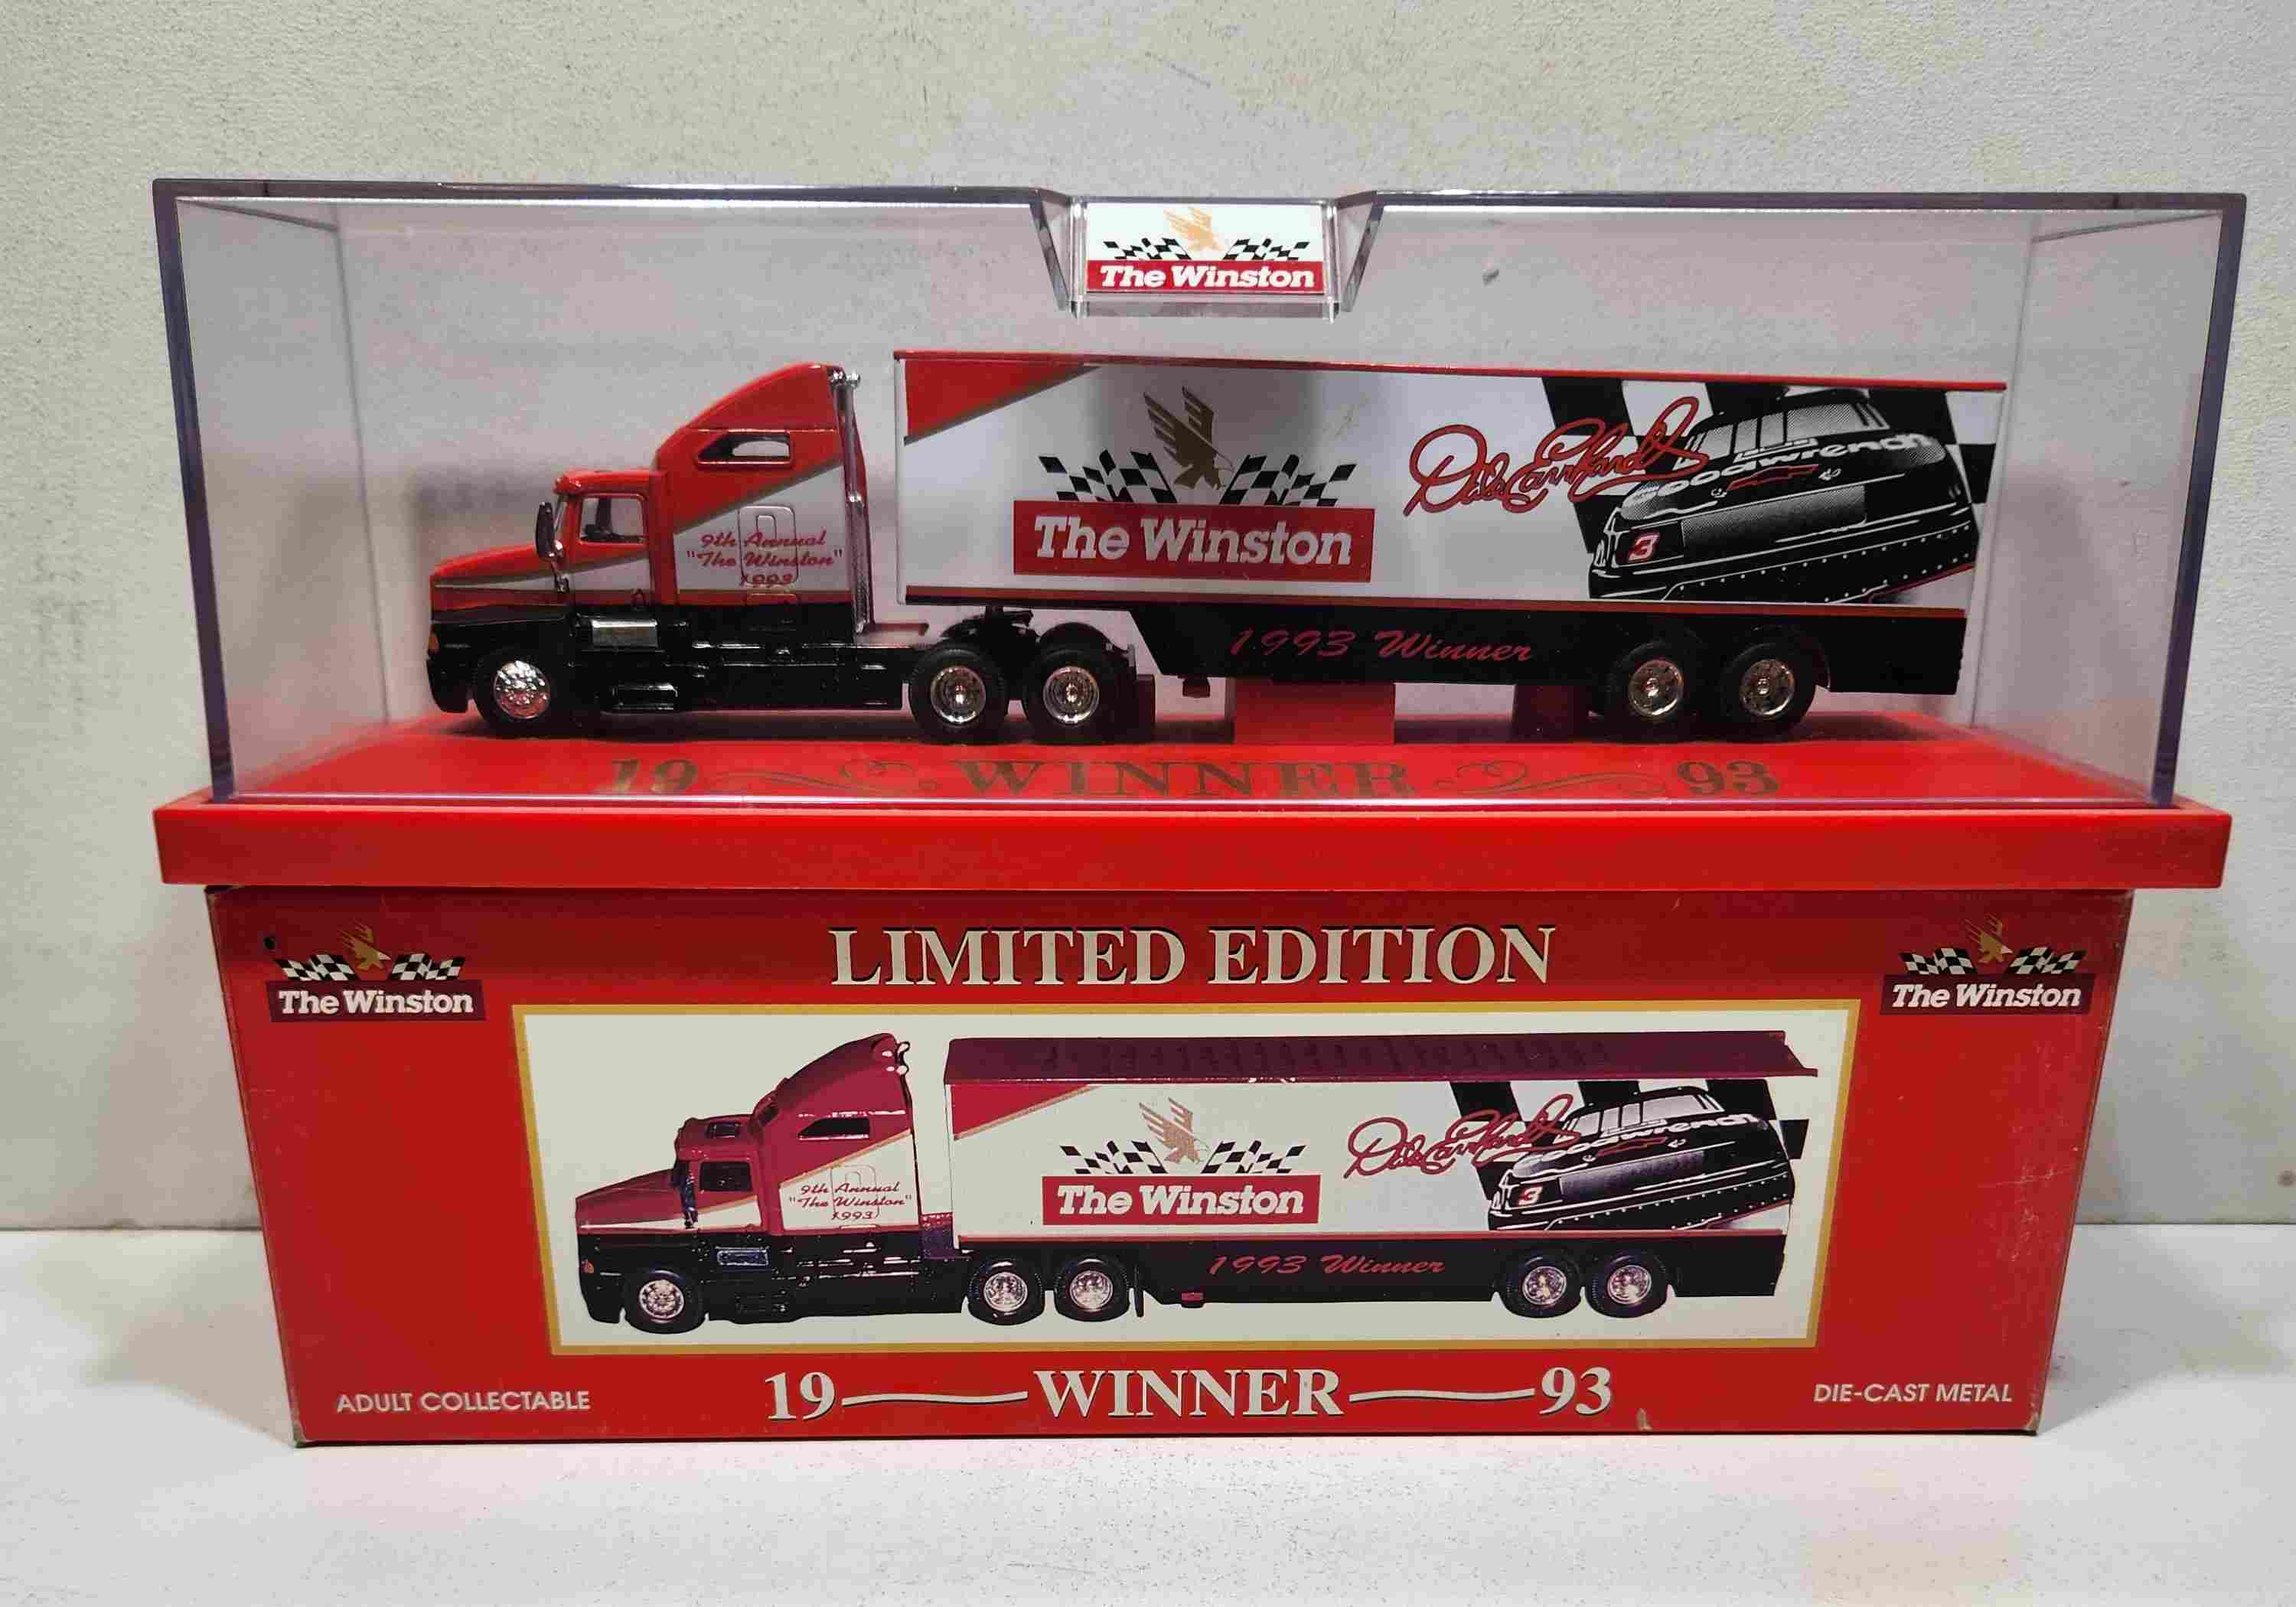 1993 Dale Earnhardt 1/64th "The Winston" "Winner" Transporter by Racing Champions